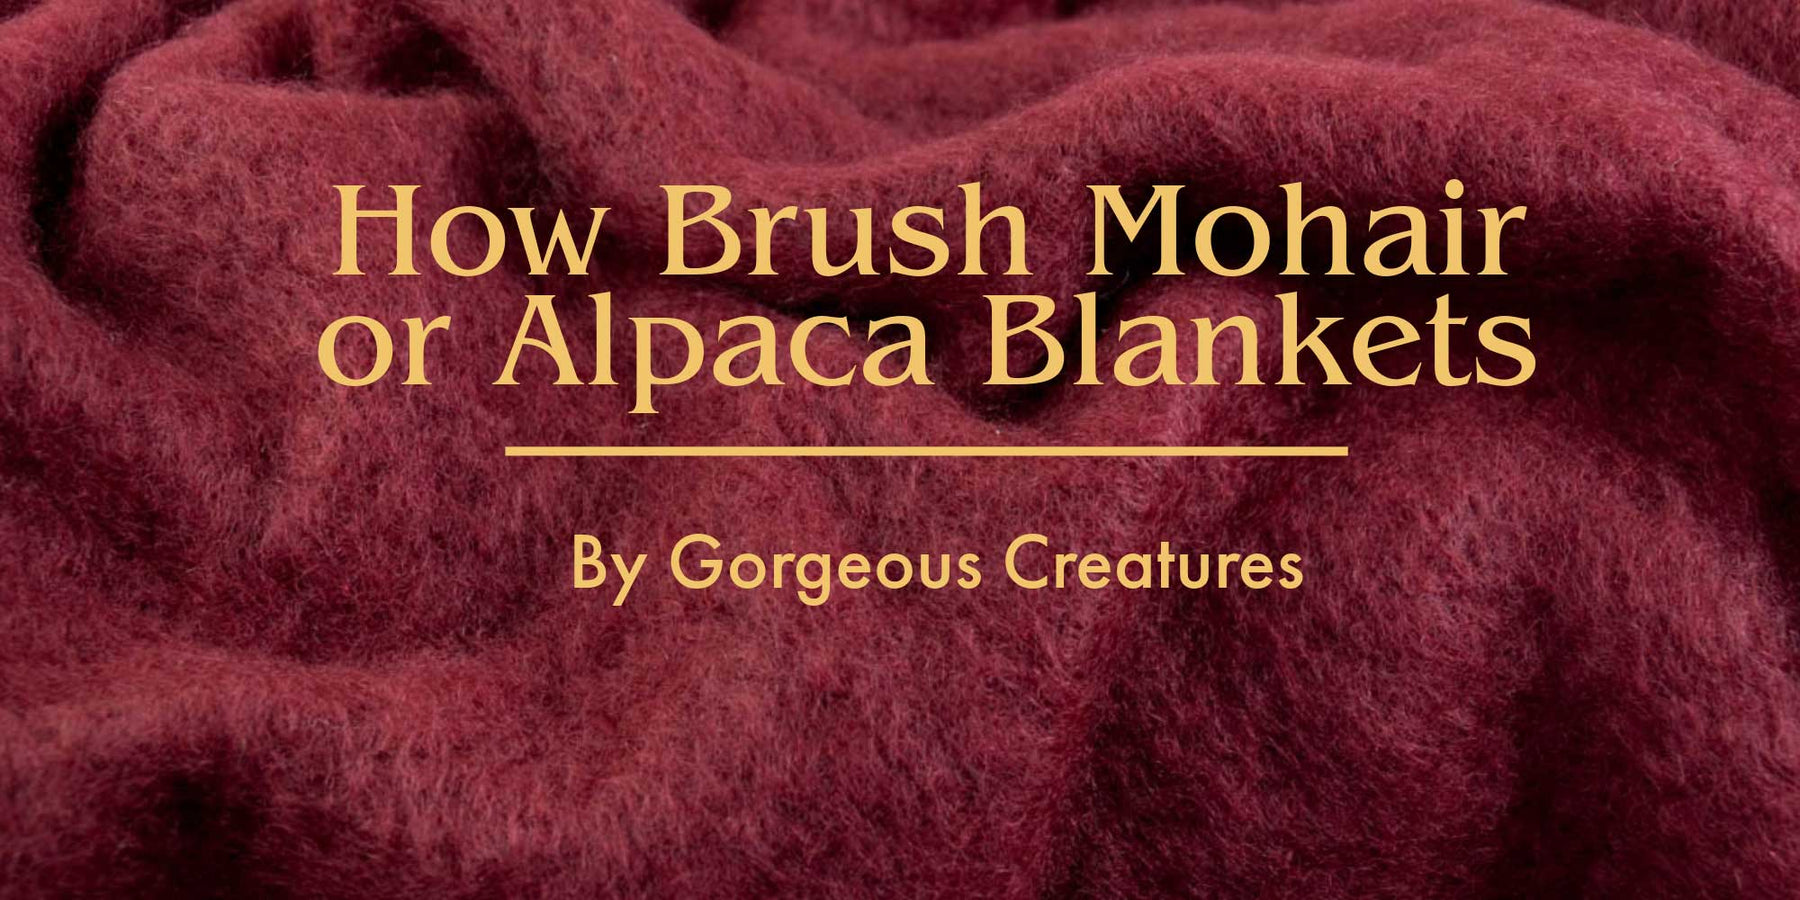 How to brush a mohair or alpaca blanket